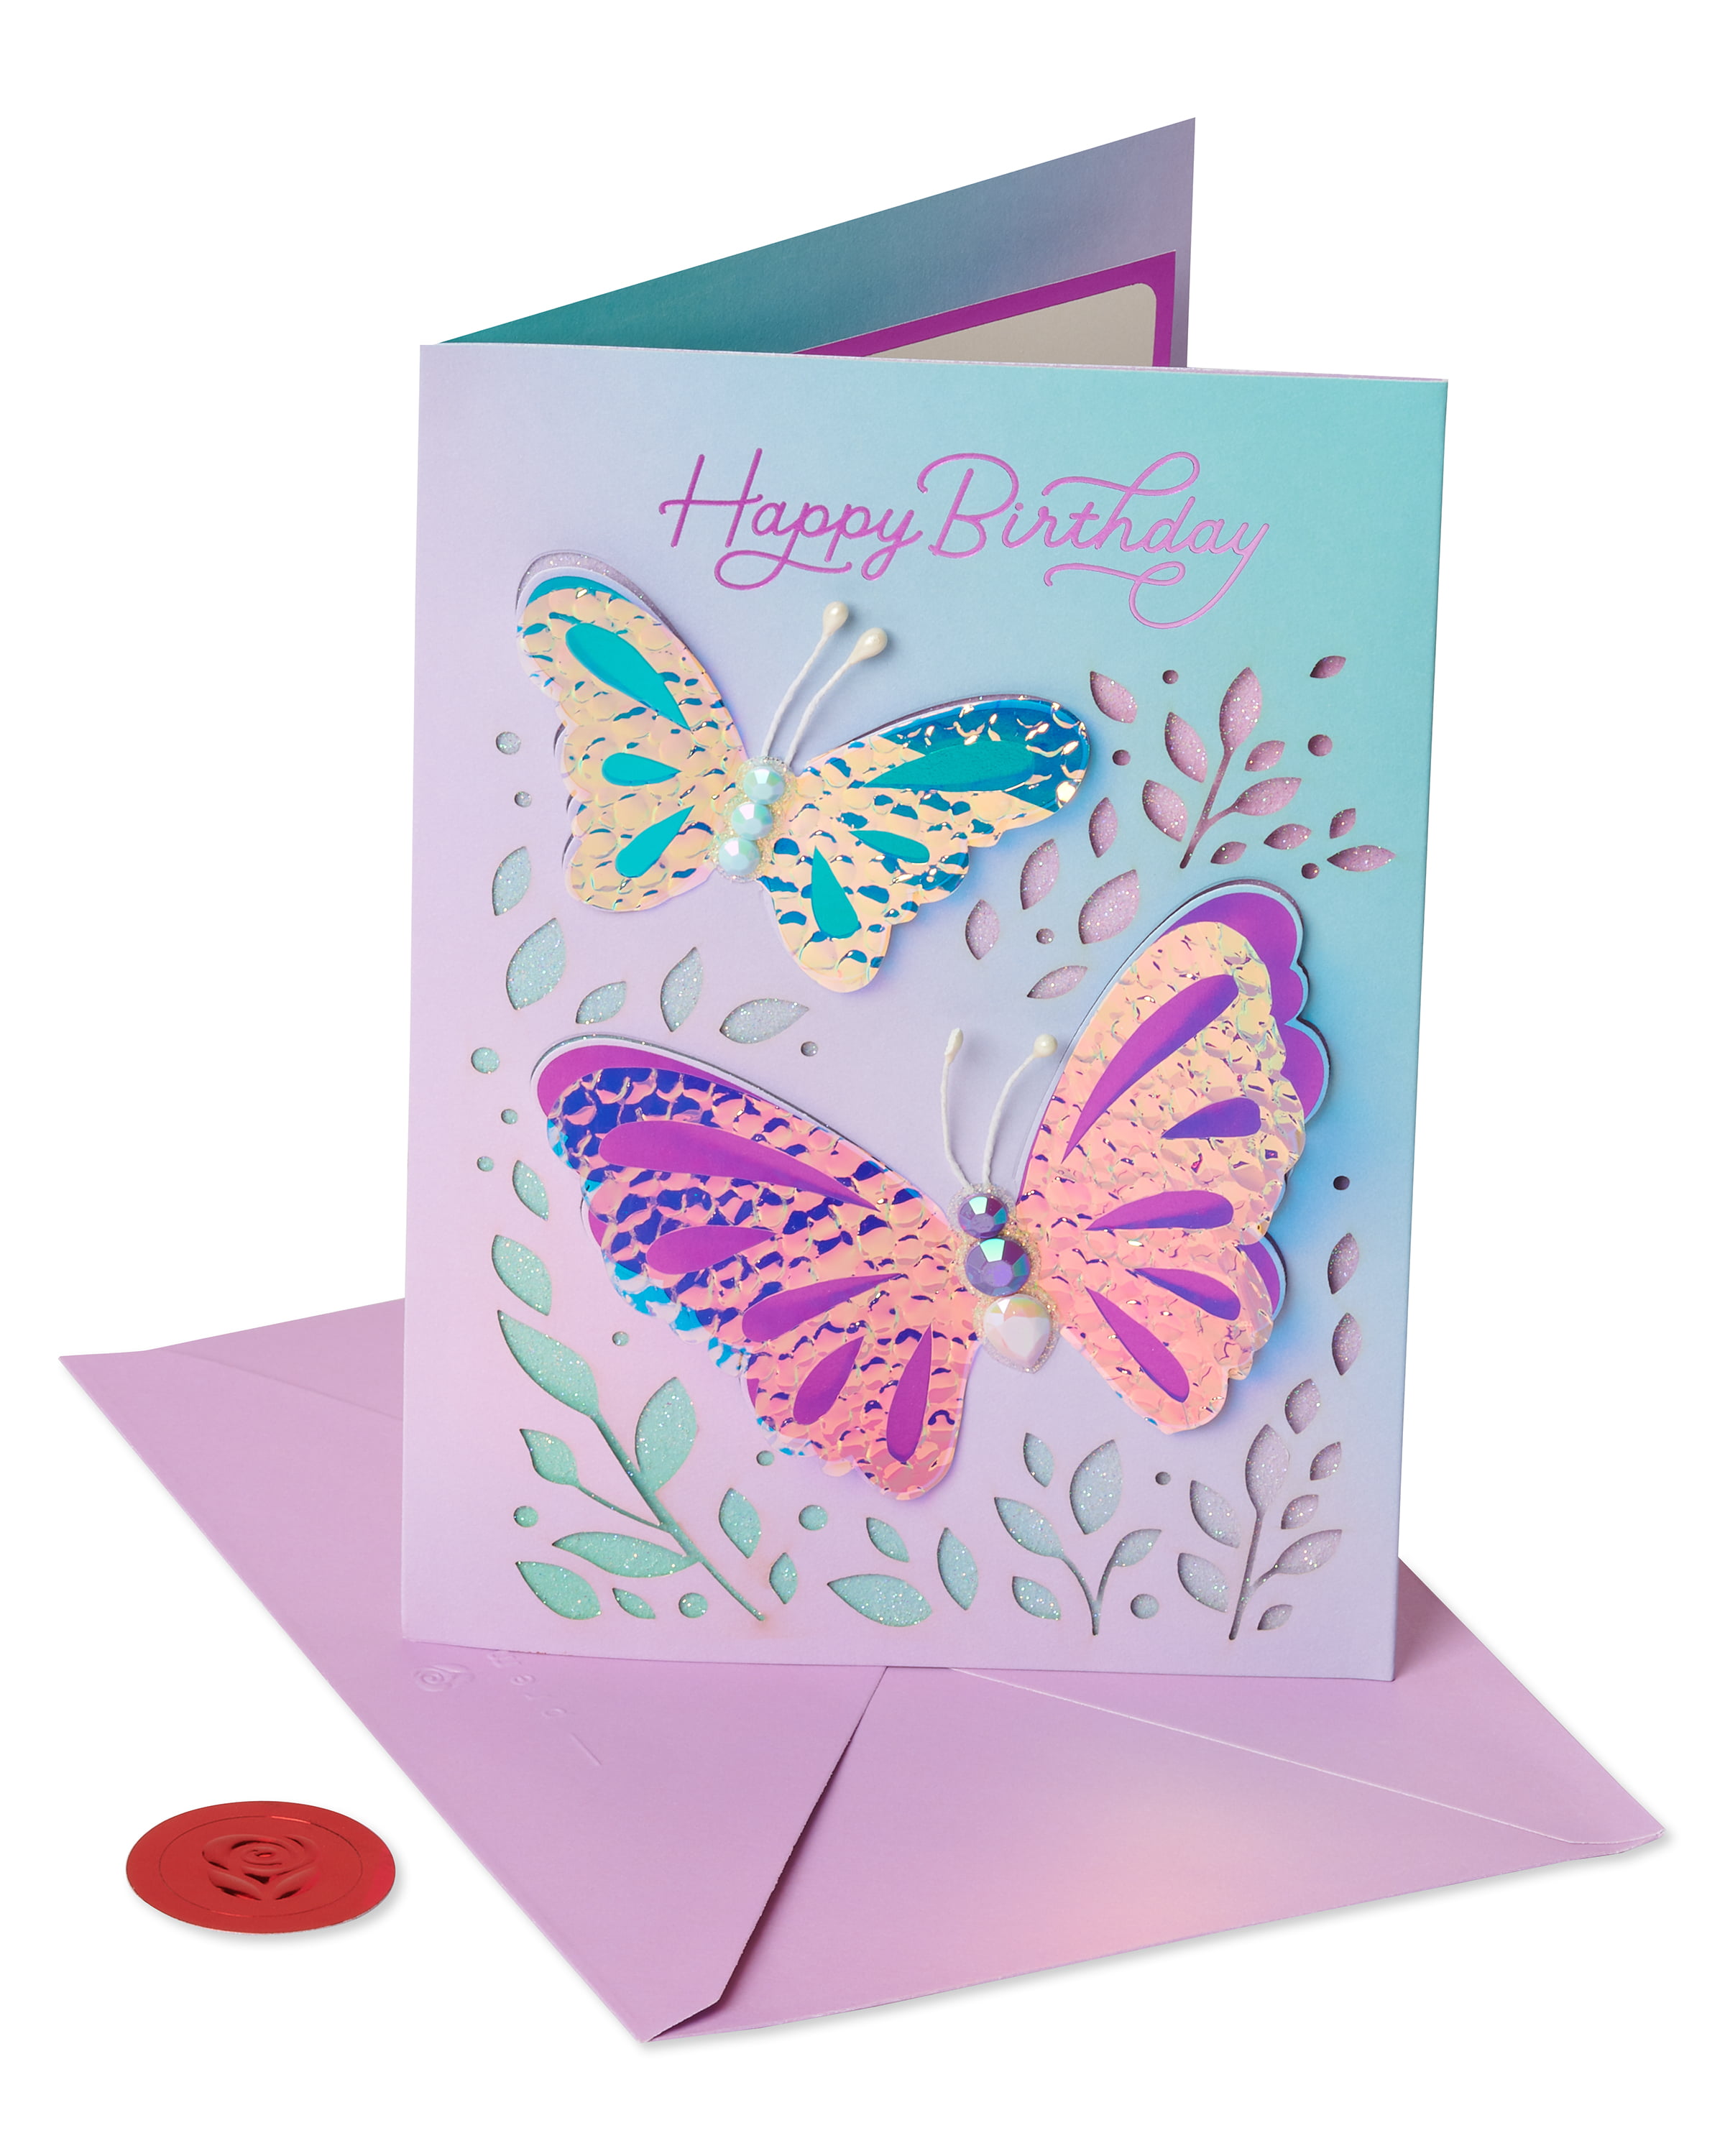 Exclusive Flying Butterfly works with ALL GREETING CARDS 1* GREETING CARD MAGIC 